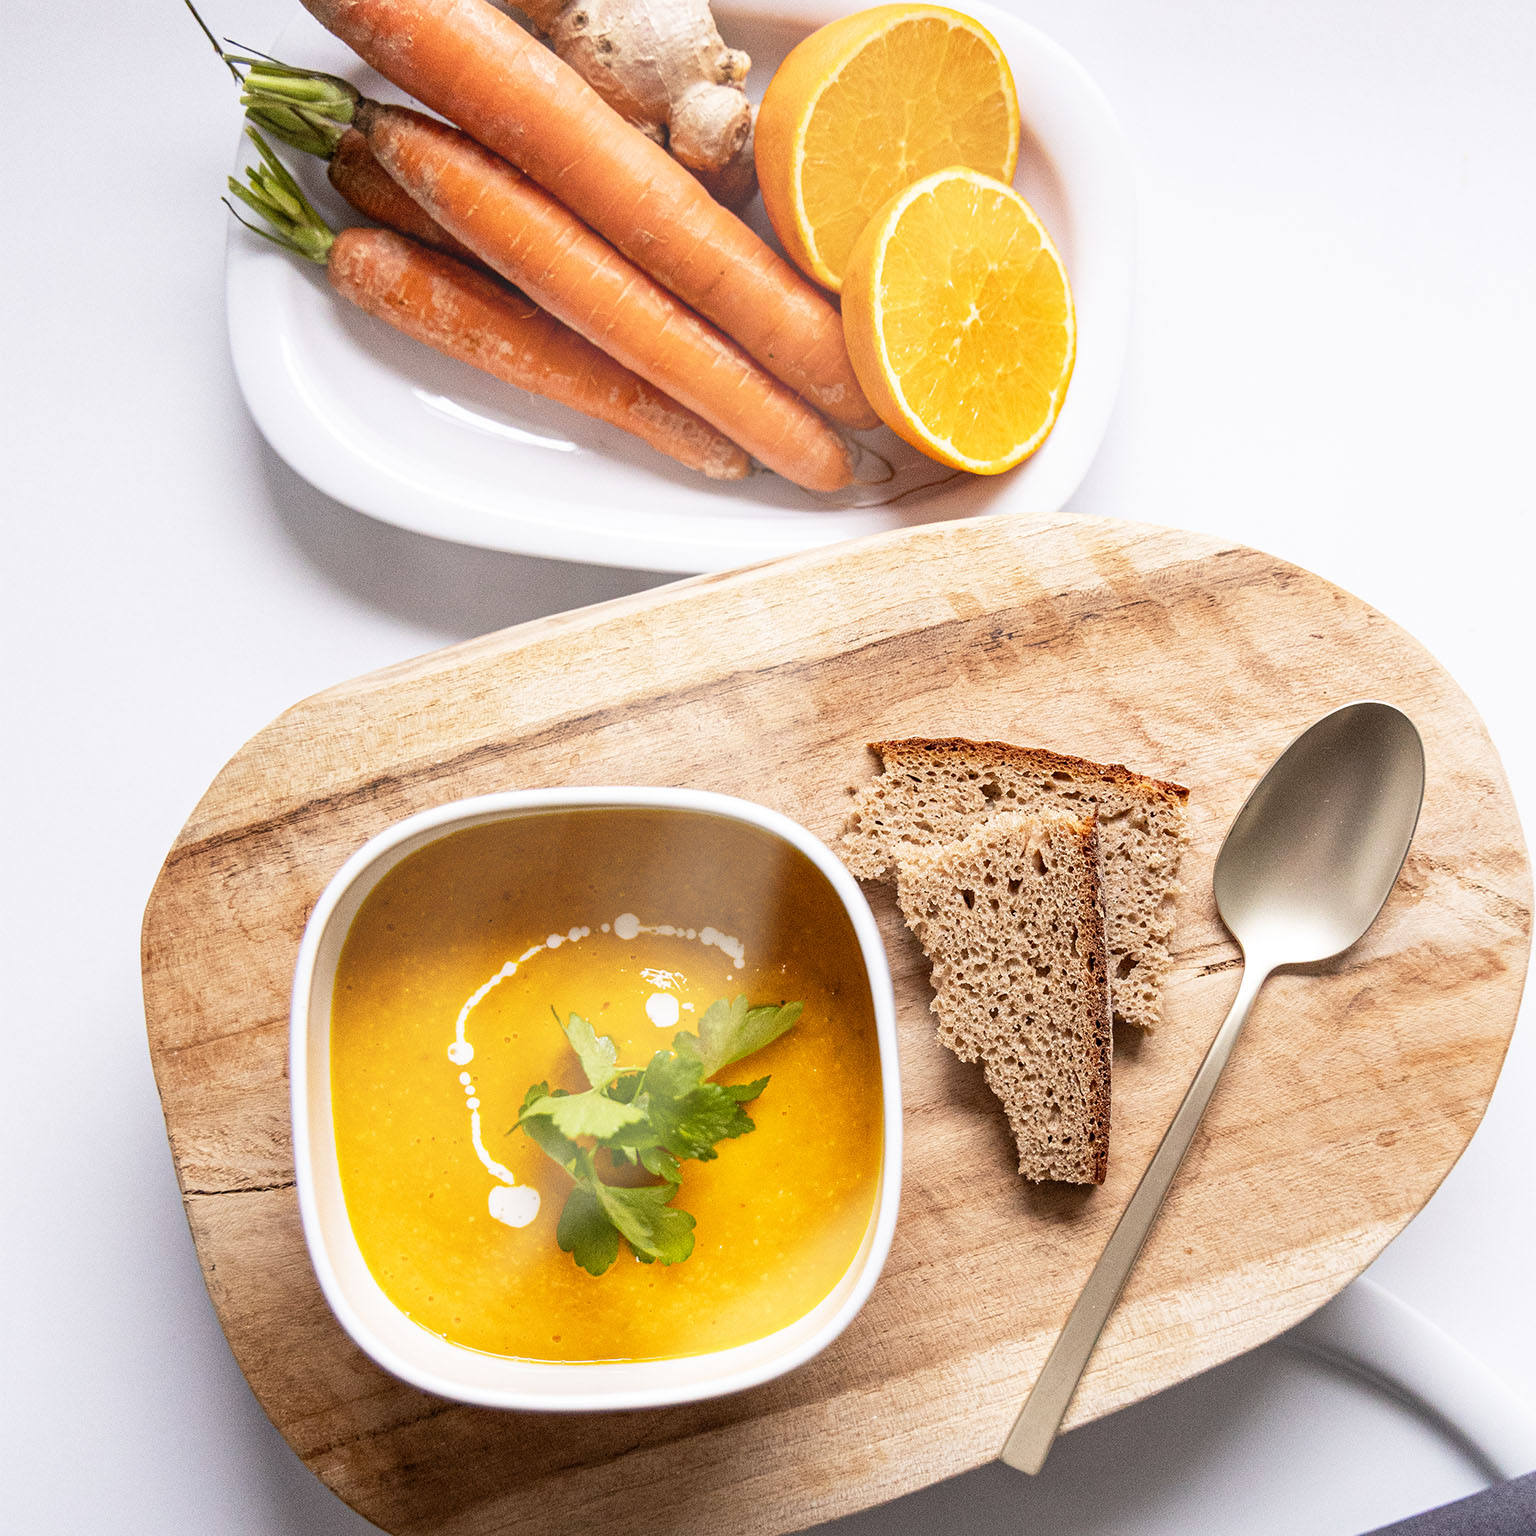 Rosenthal Suomi bowl filled with pumpkin cream on a wooden tray with carrots in the background